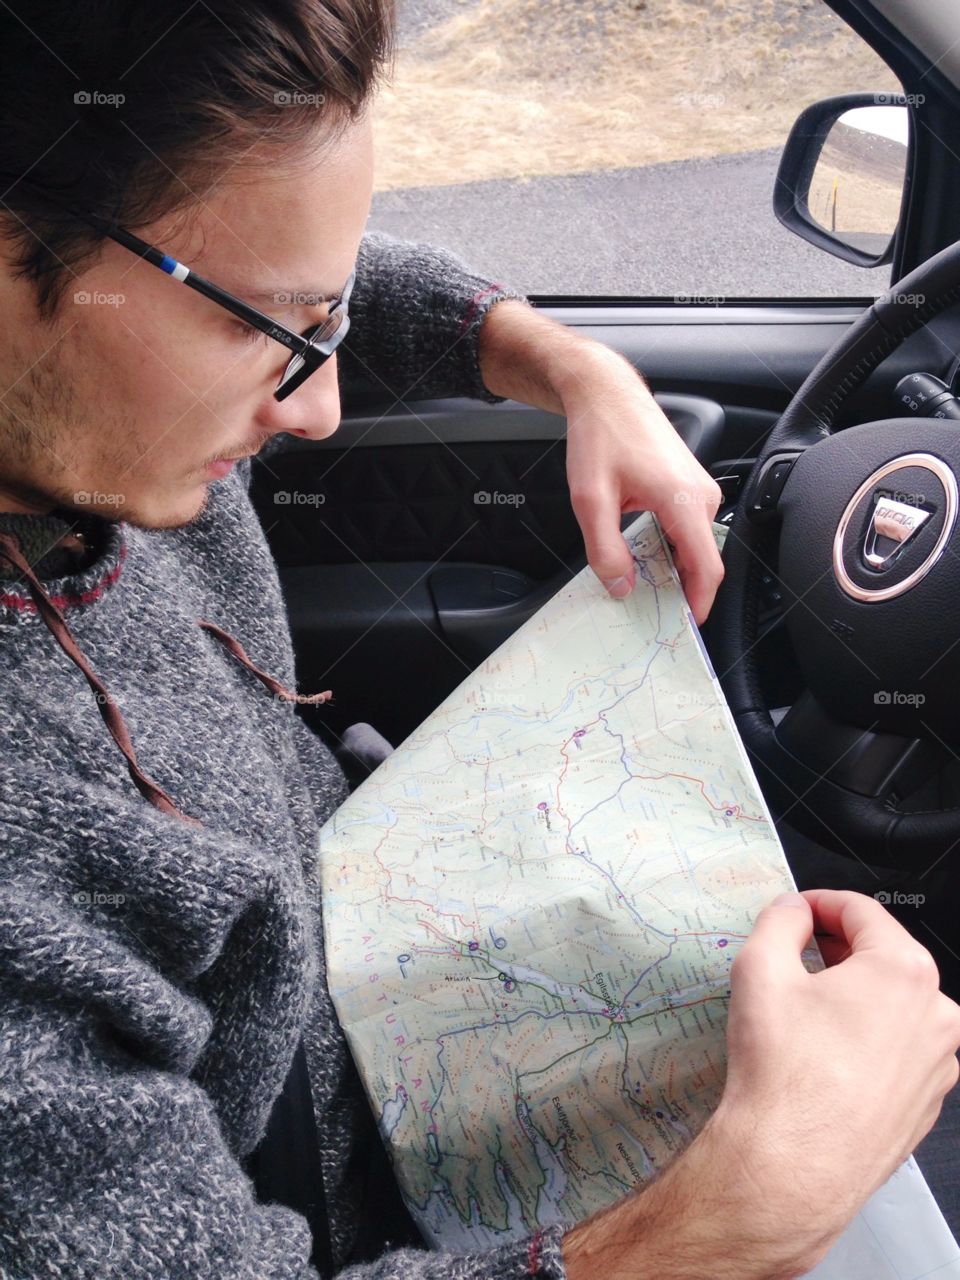 Checking the map